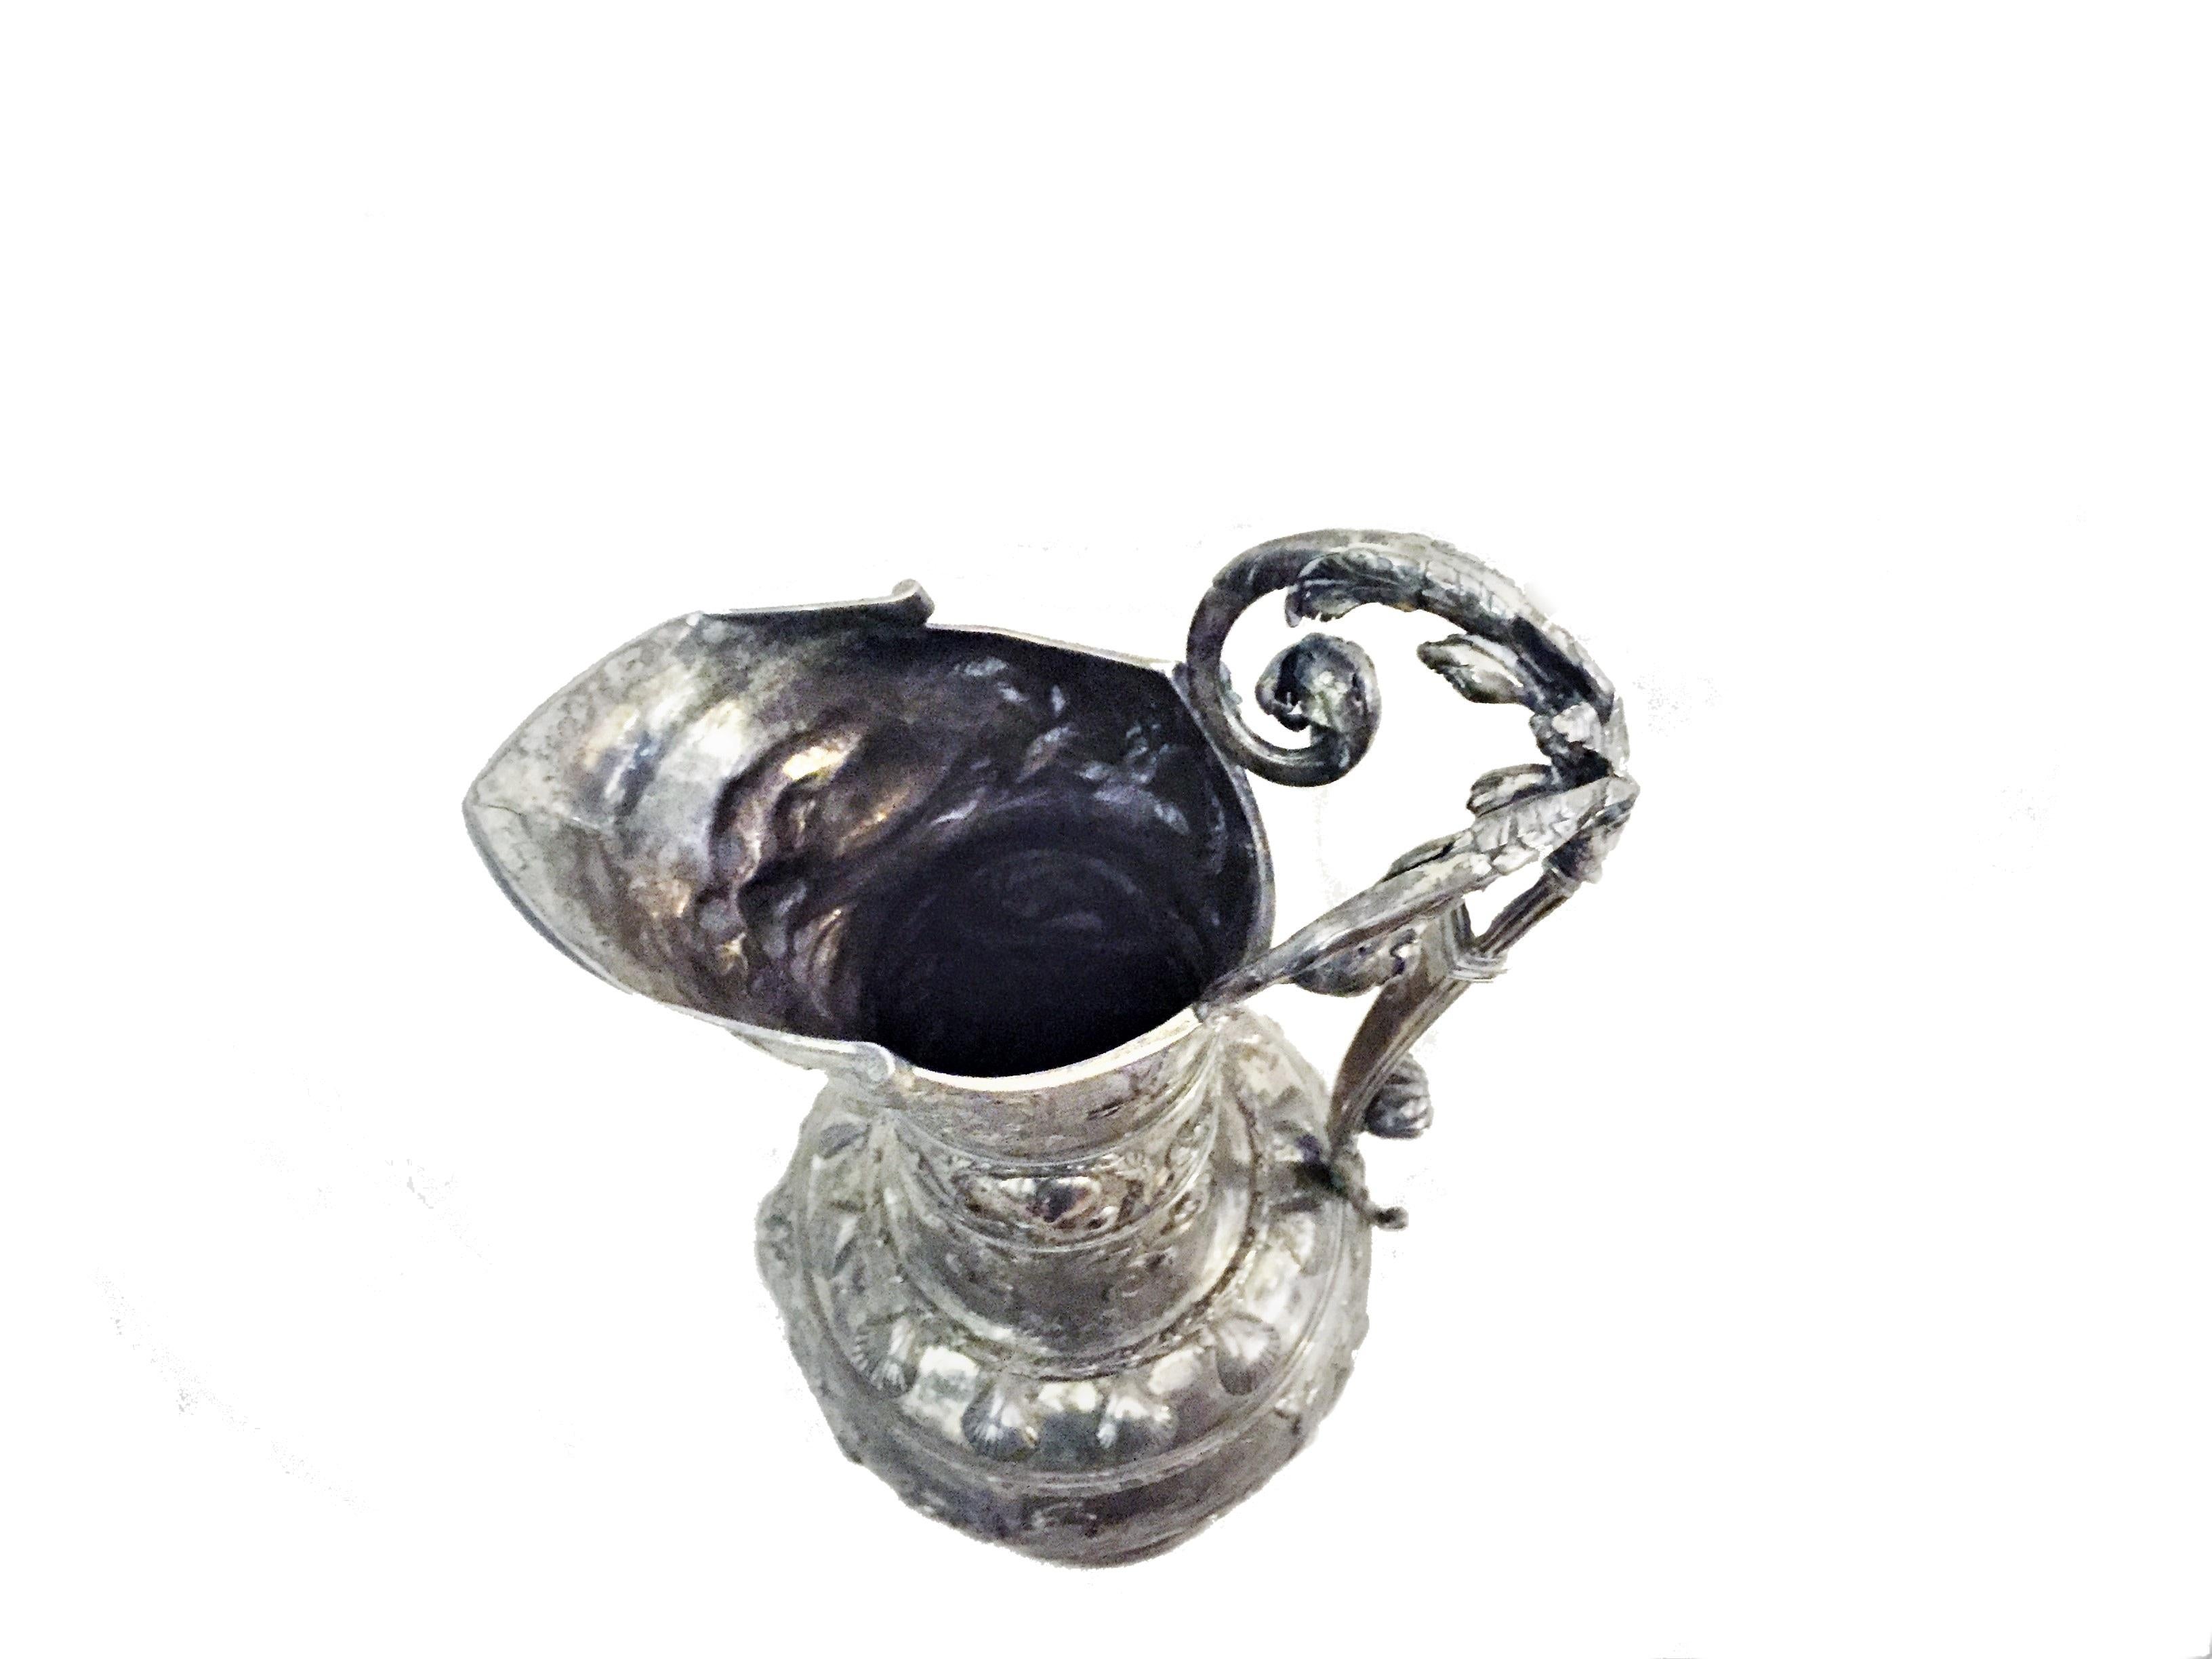 This amazing silver wine jug in perfect German Baroque style of the 17th century was actually finely crafted in the repoussé and chasing techniques at the end of 19th century. Though unmarked, clearly it is a work of a master silversmith.

The